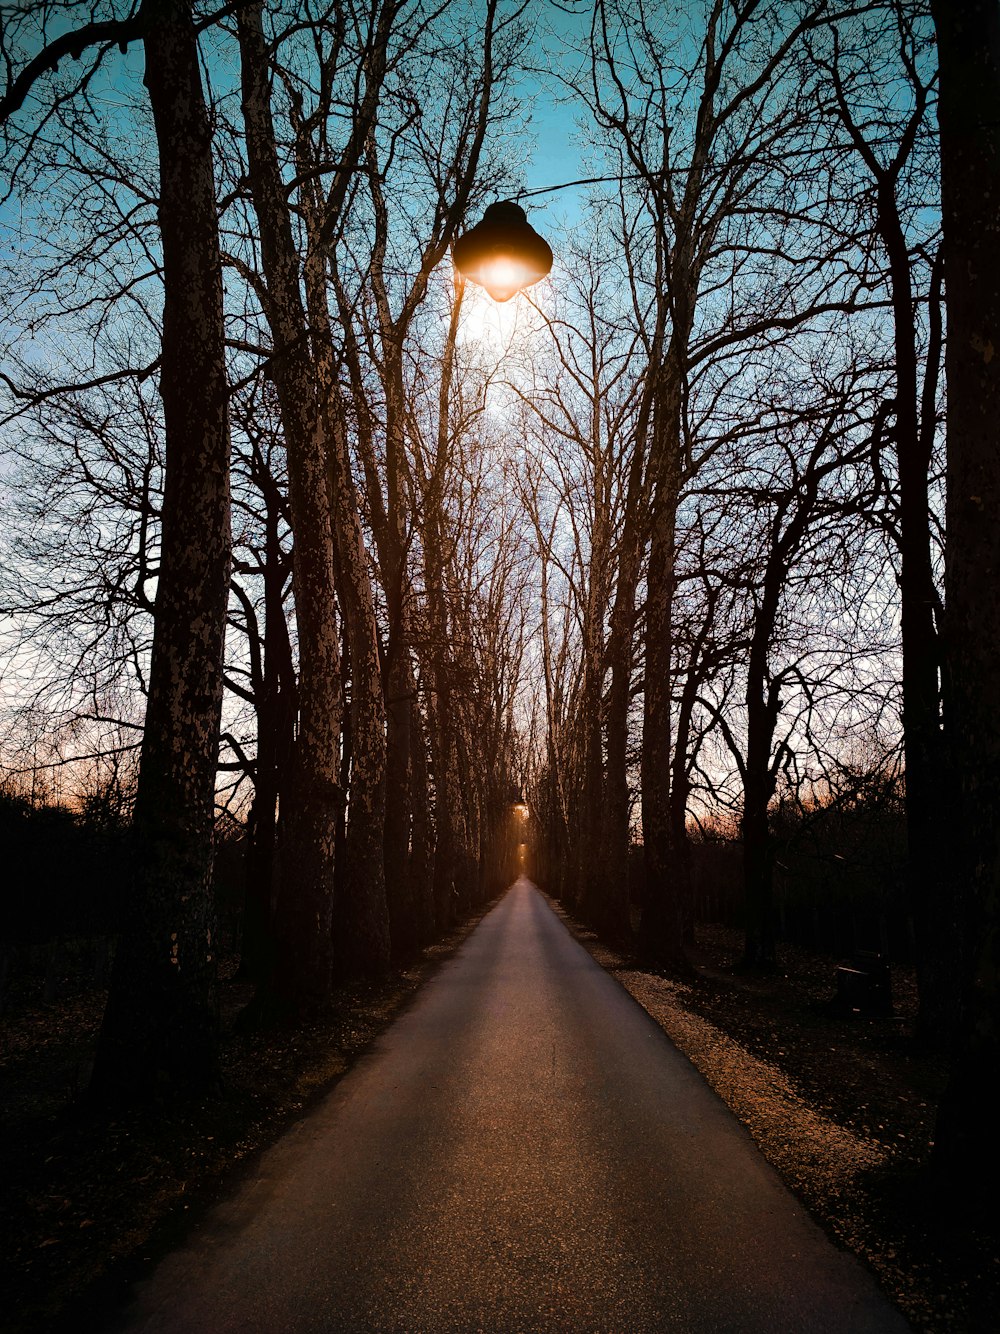 a street light hanging over a road surrounded by trees